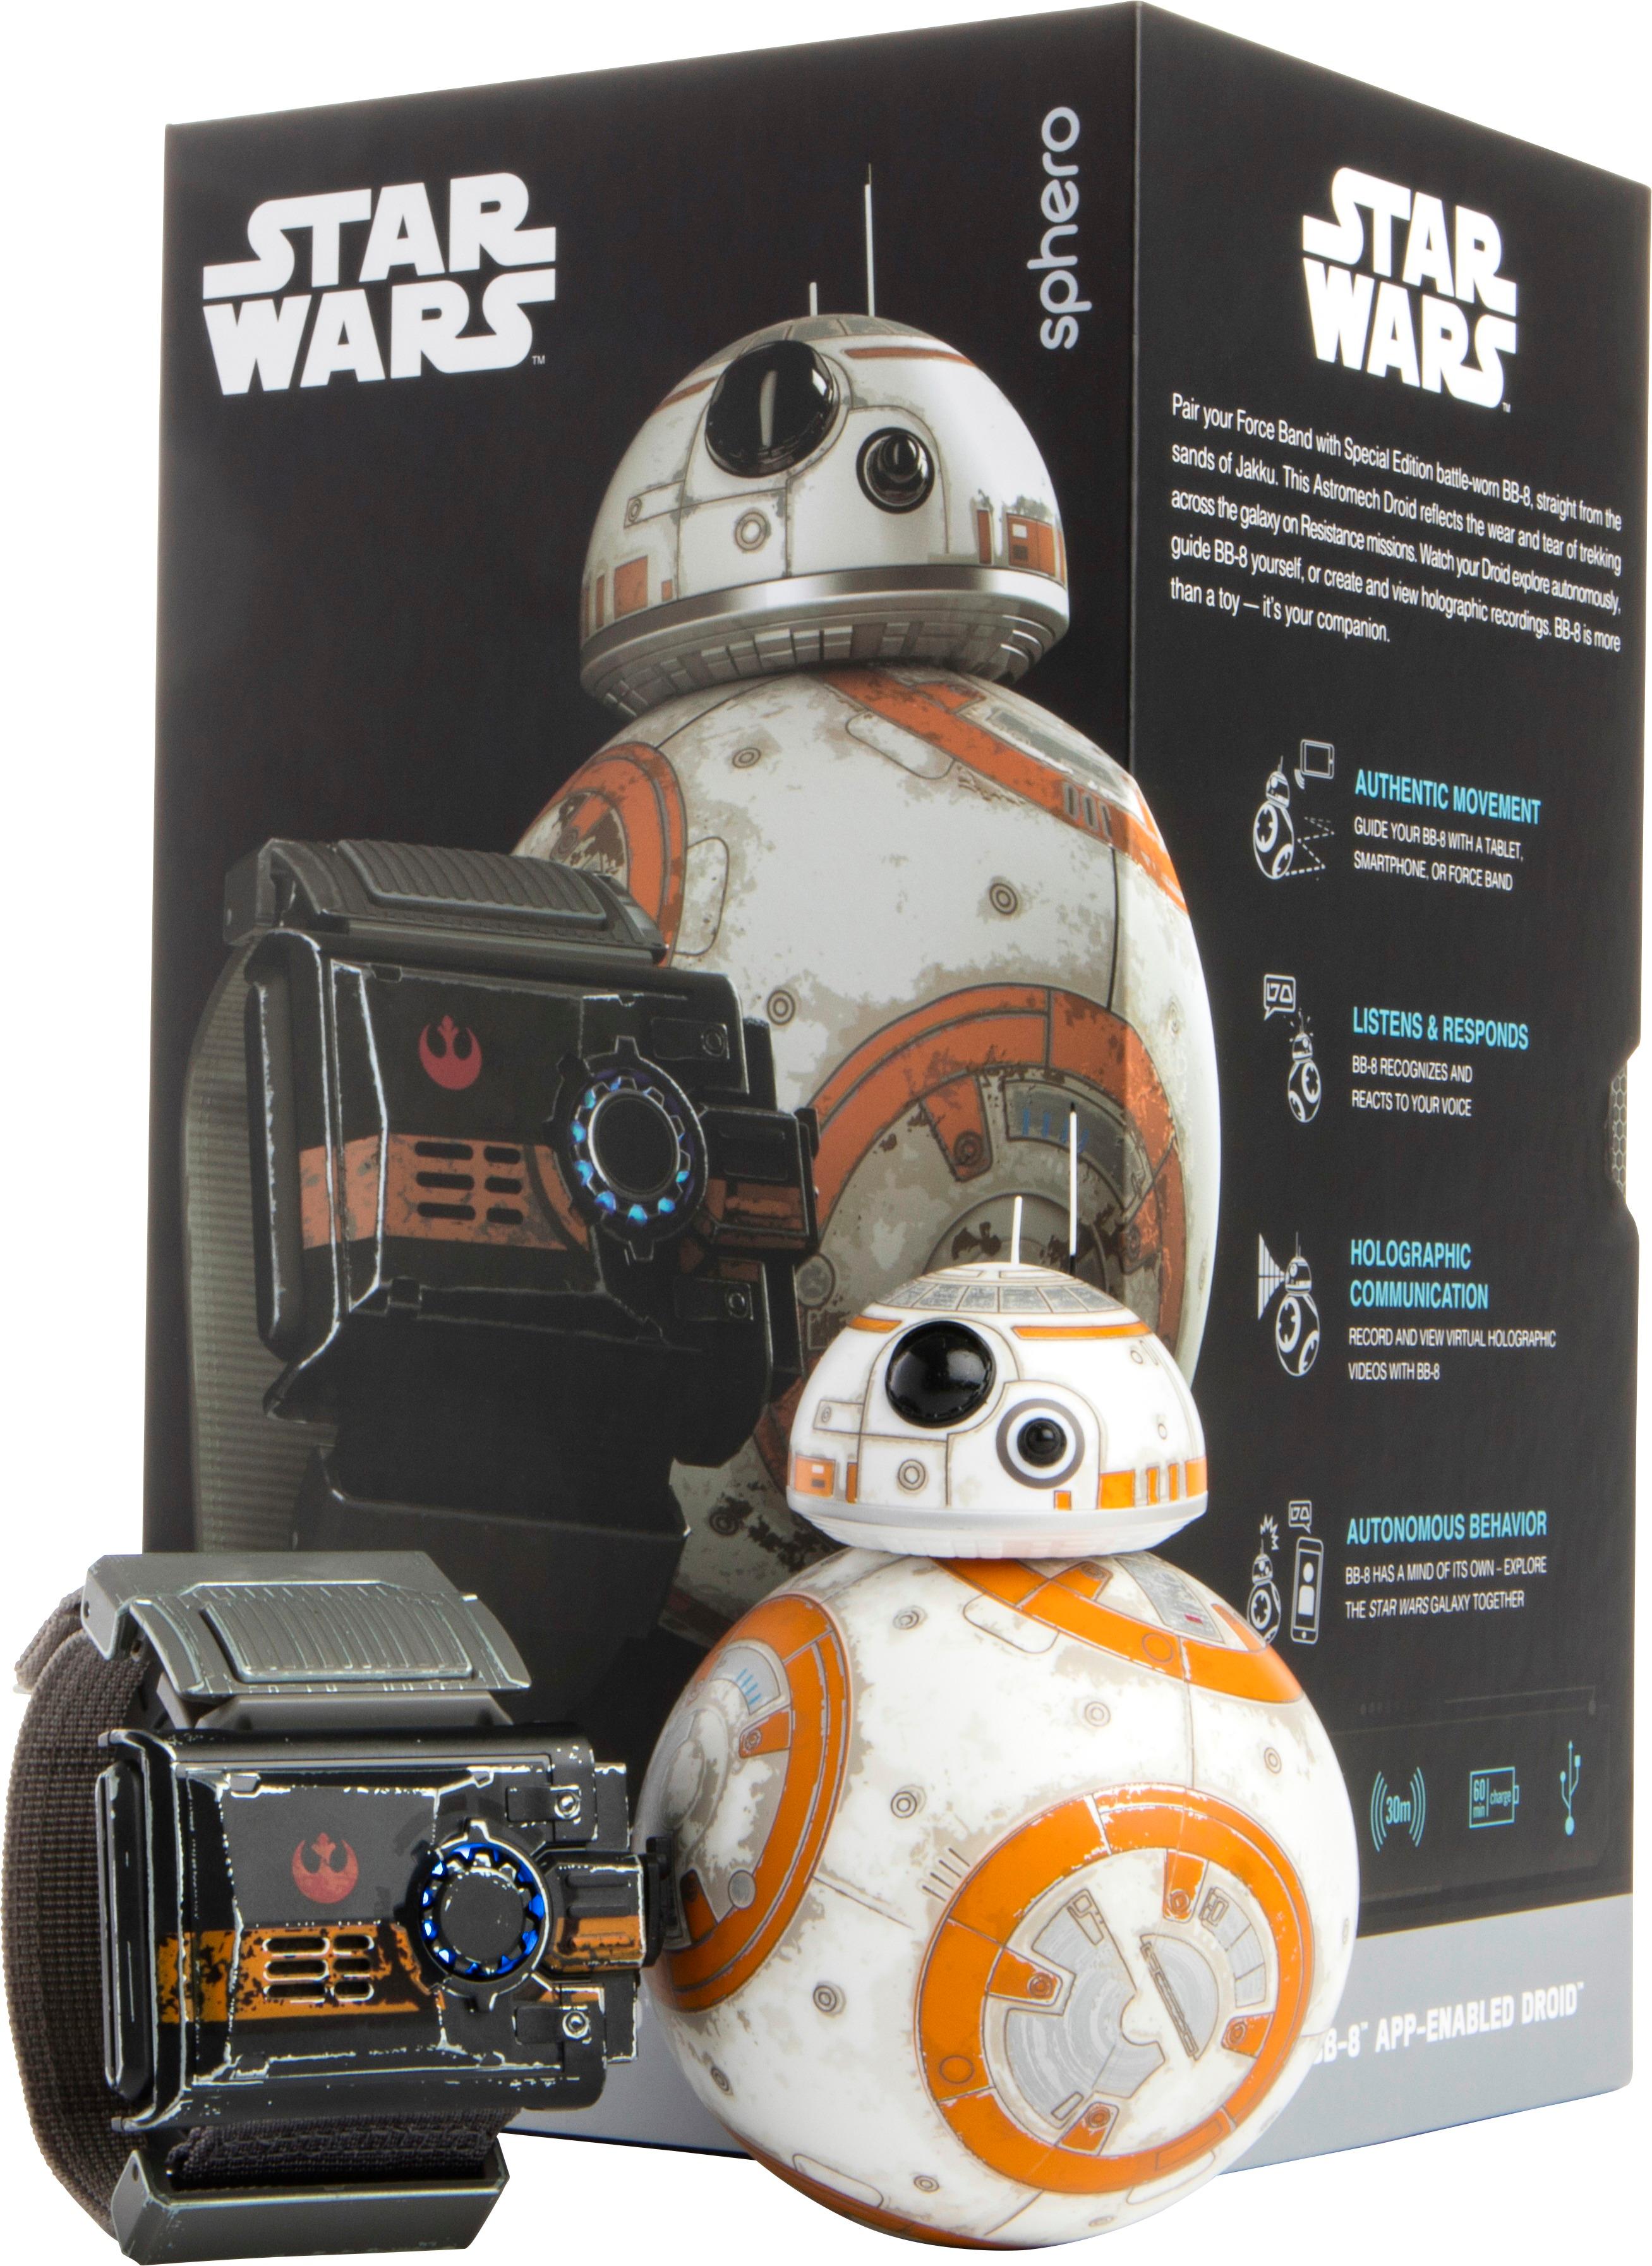 Rare Sphero Star Wars Special Edition BB-8 Droid & Force Band Shop Display Unit 